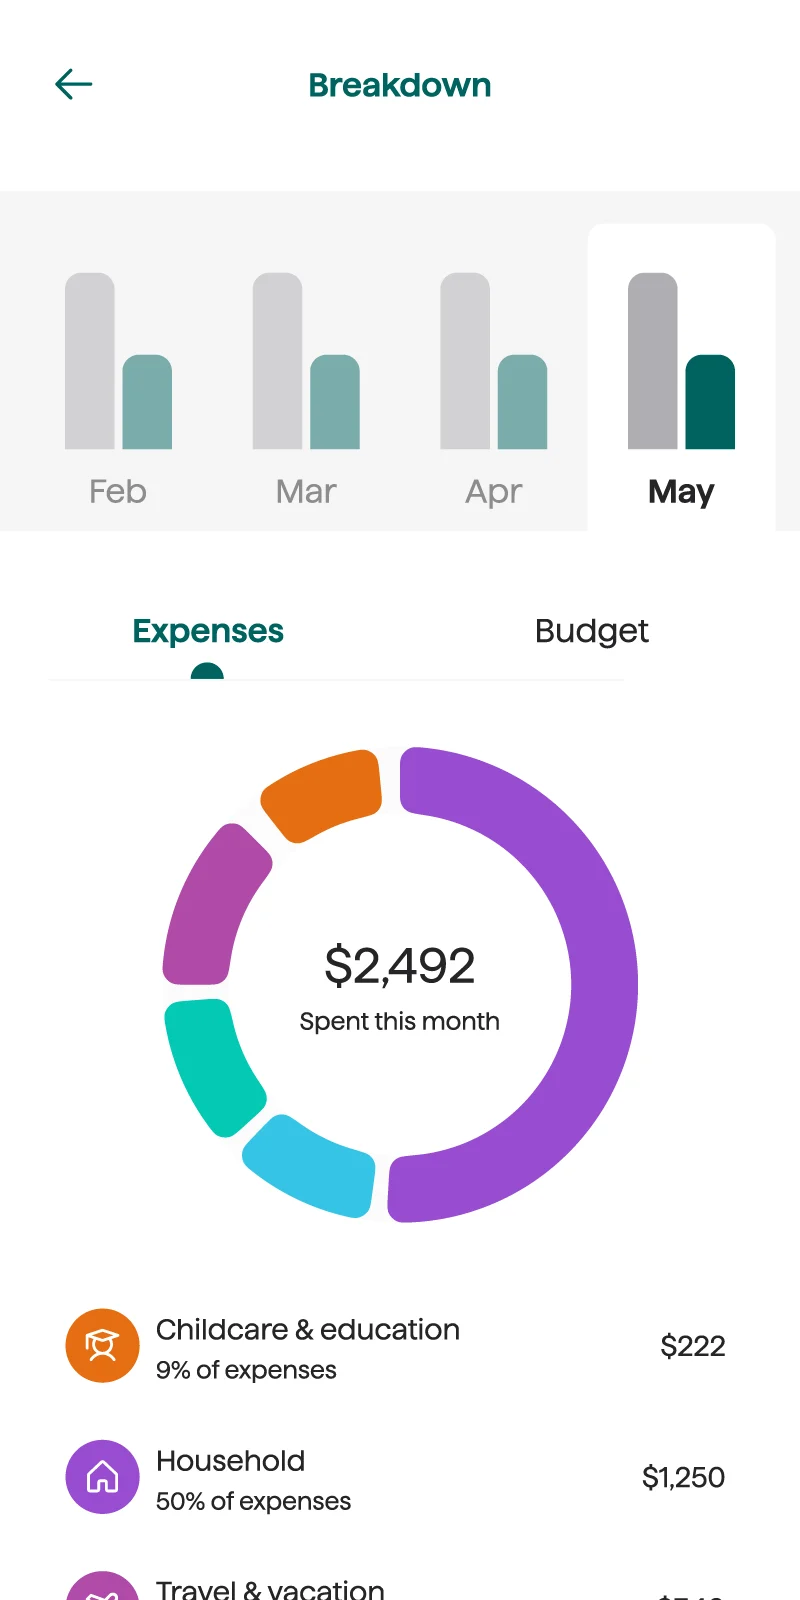 Origin app screen showing a 'Breakdown' of expenses with grey bar graphs for February through May. Below, a colorful circular chart represents 'Expenses' of $2,492 for the current month, with segments for 'Childcare & education' at 9% costing $222, and 'Household' expenses at 50% costing $1,250.